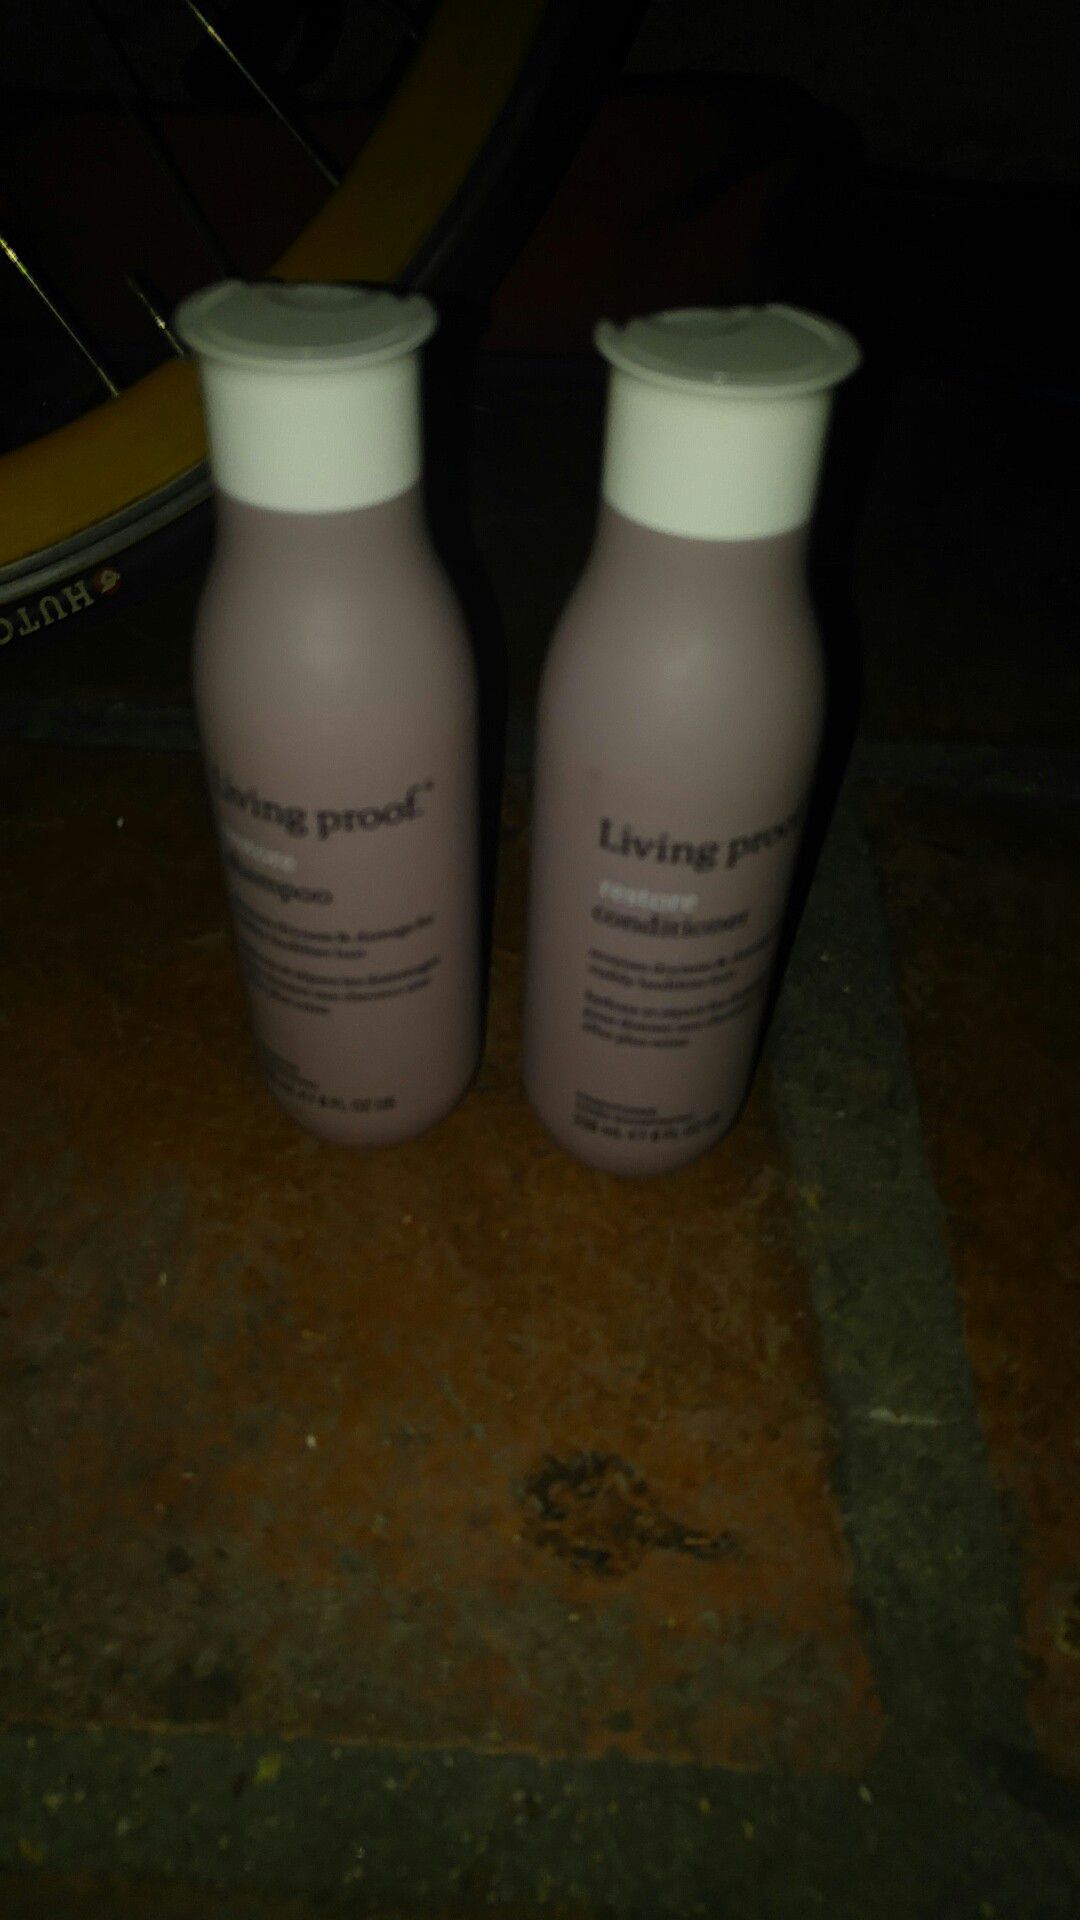 Living proof.shampoo and conditioner